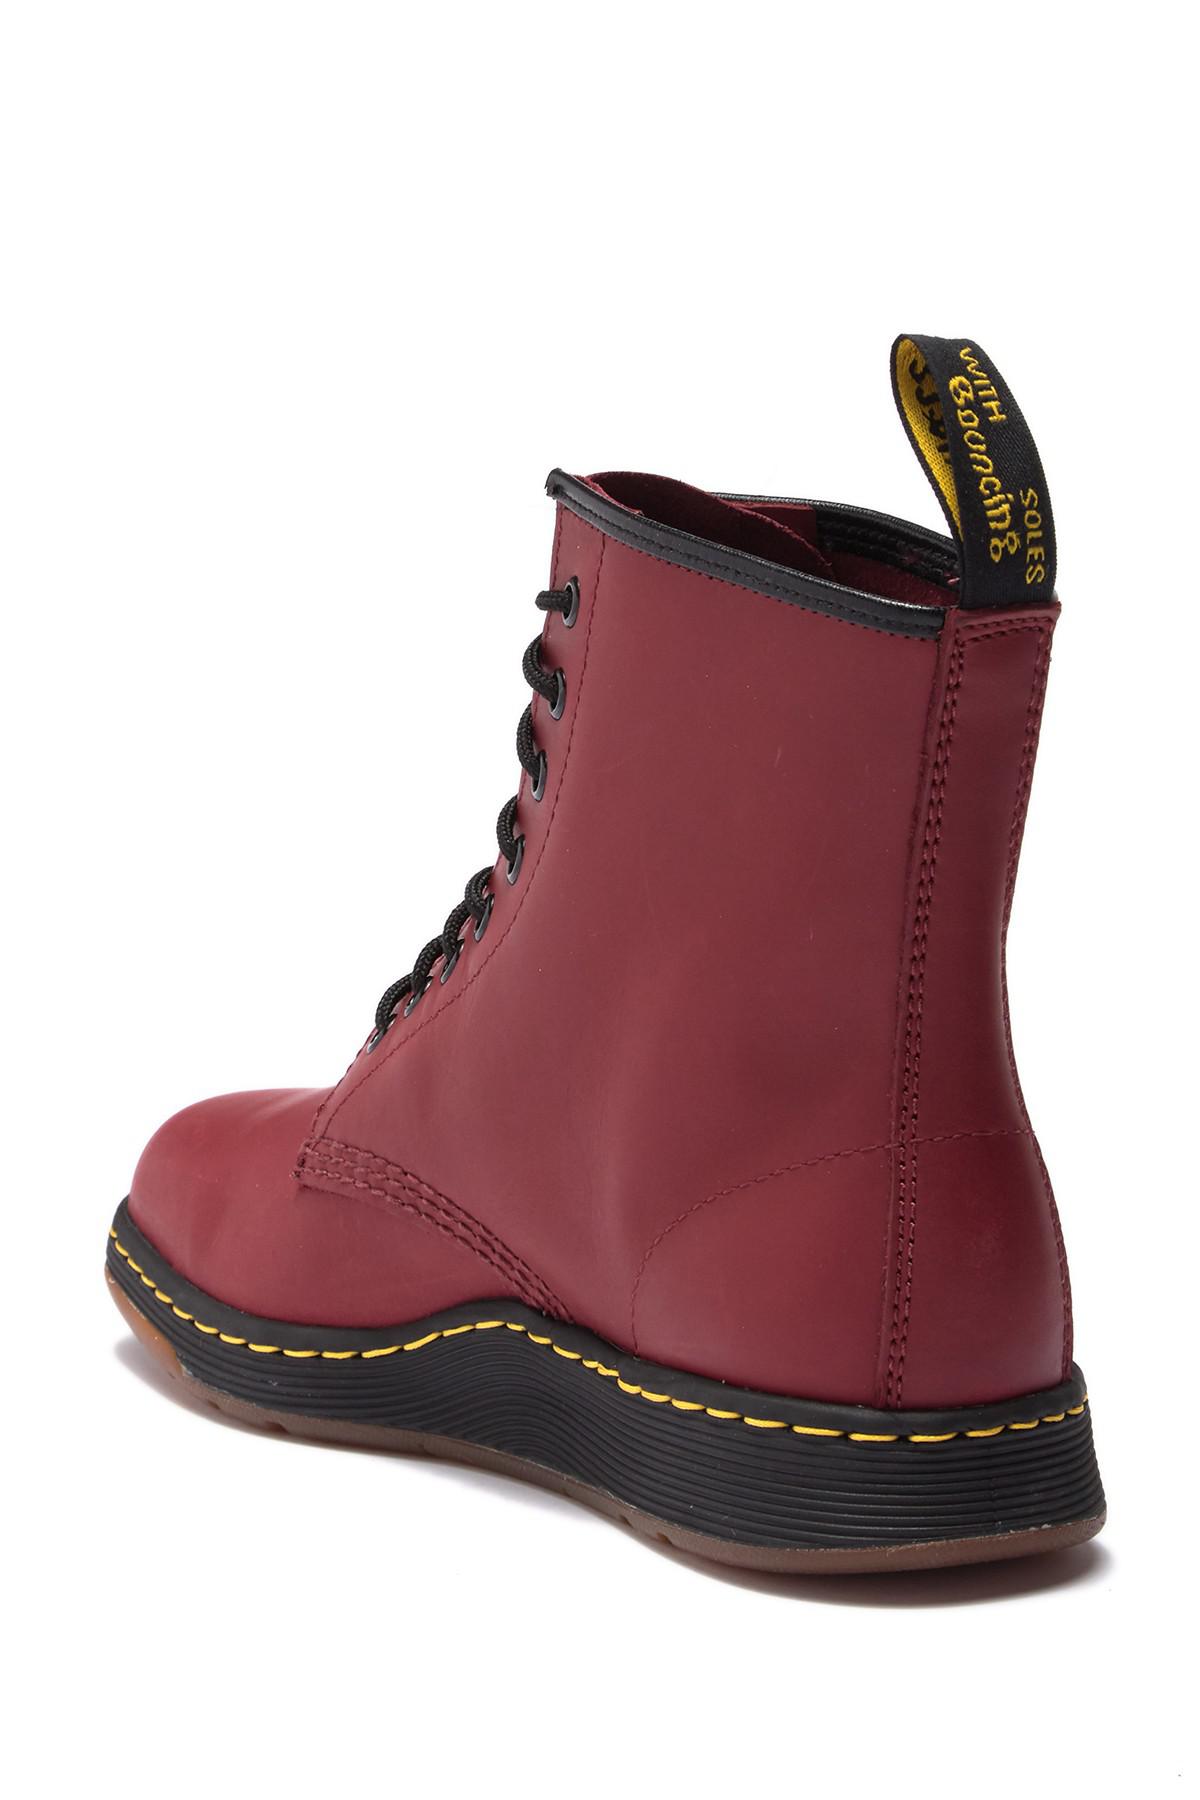 Dr. Martens Newton Leather Boot in Cherry Red (Red) for Men - Lyst